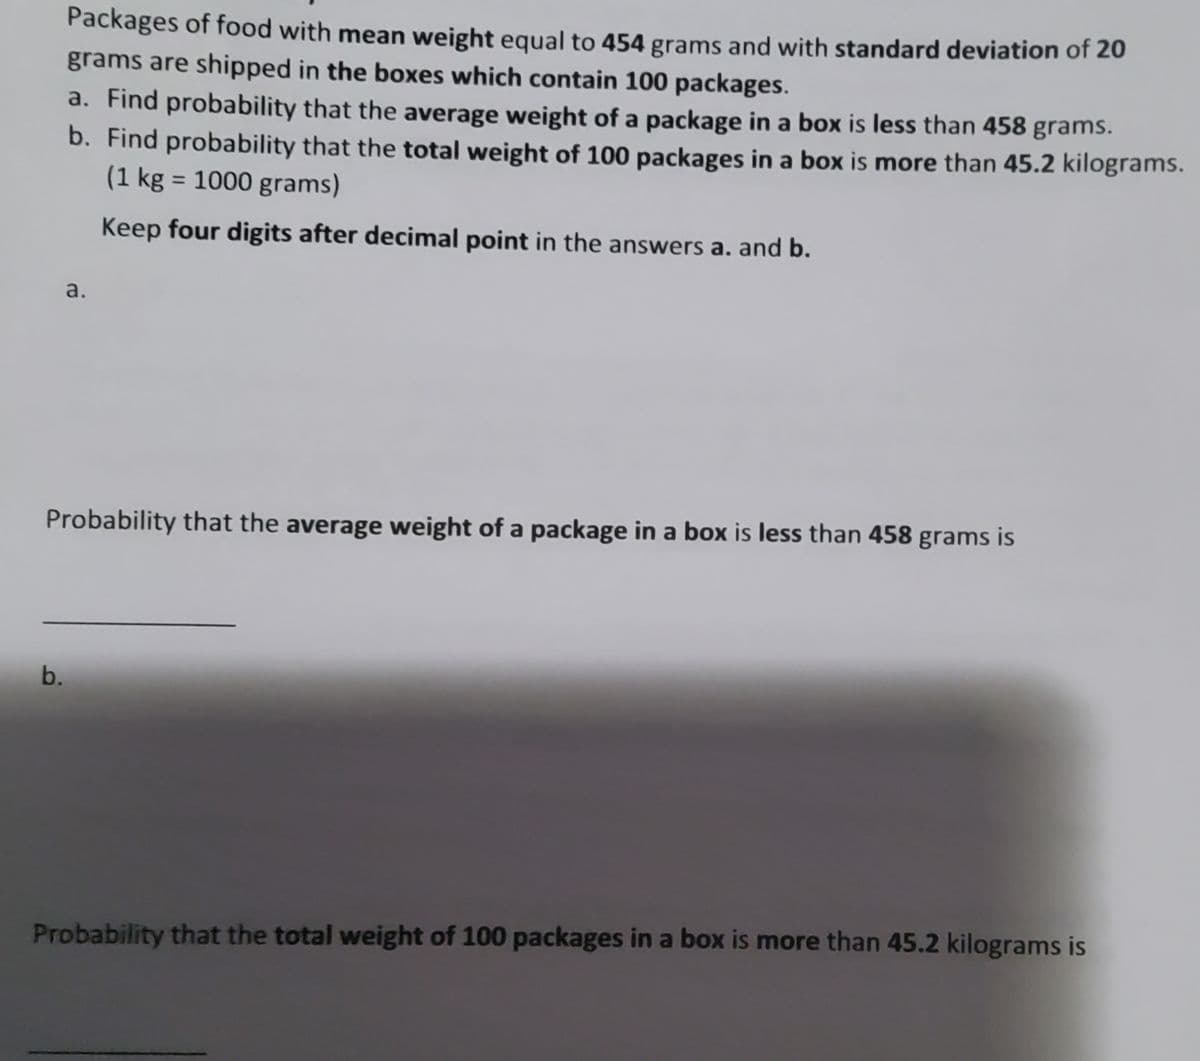 Packages of food with mean weight equal to 454 grams and with standard deviation of 20
grams are shipped in the boxes which contain 100 packages.
b.
a. Find probability that the average weight of a package in a box is less than 458 grams.
b. Find probability that the total weight of 100 packages in a box is more than 45.2 kilograms.
(1 kg = 1000 grams)
Keep four digits after decimal point in the answers a. and b.
a.
Probability that the average weight of a package in a box is less than 458 grams is
Probability that the total weight of 100 packages in a box is more than 45.2 kilograms is